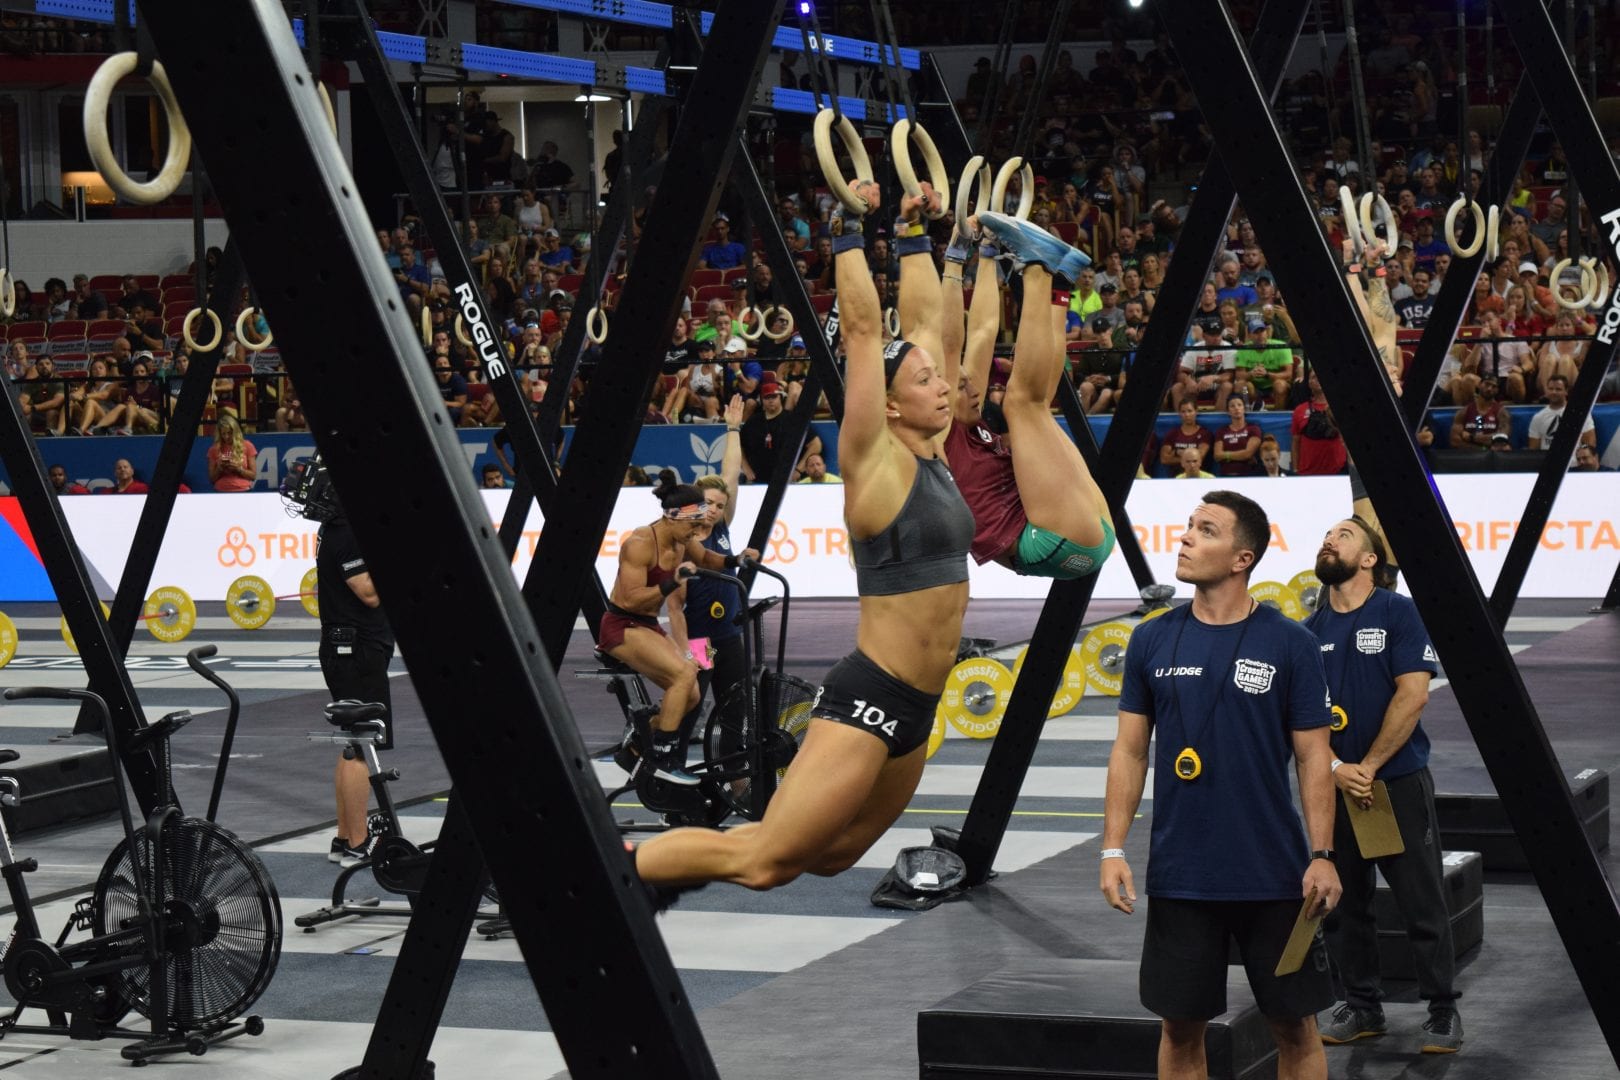 Amanda Barnhart completes toes-to-rings in the Coliseum at the 2019 CrossFit Games.